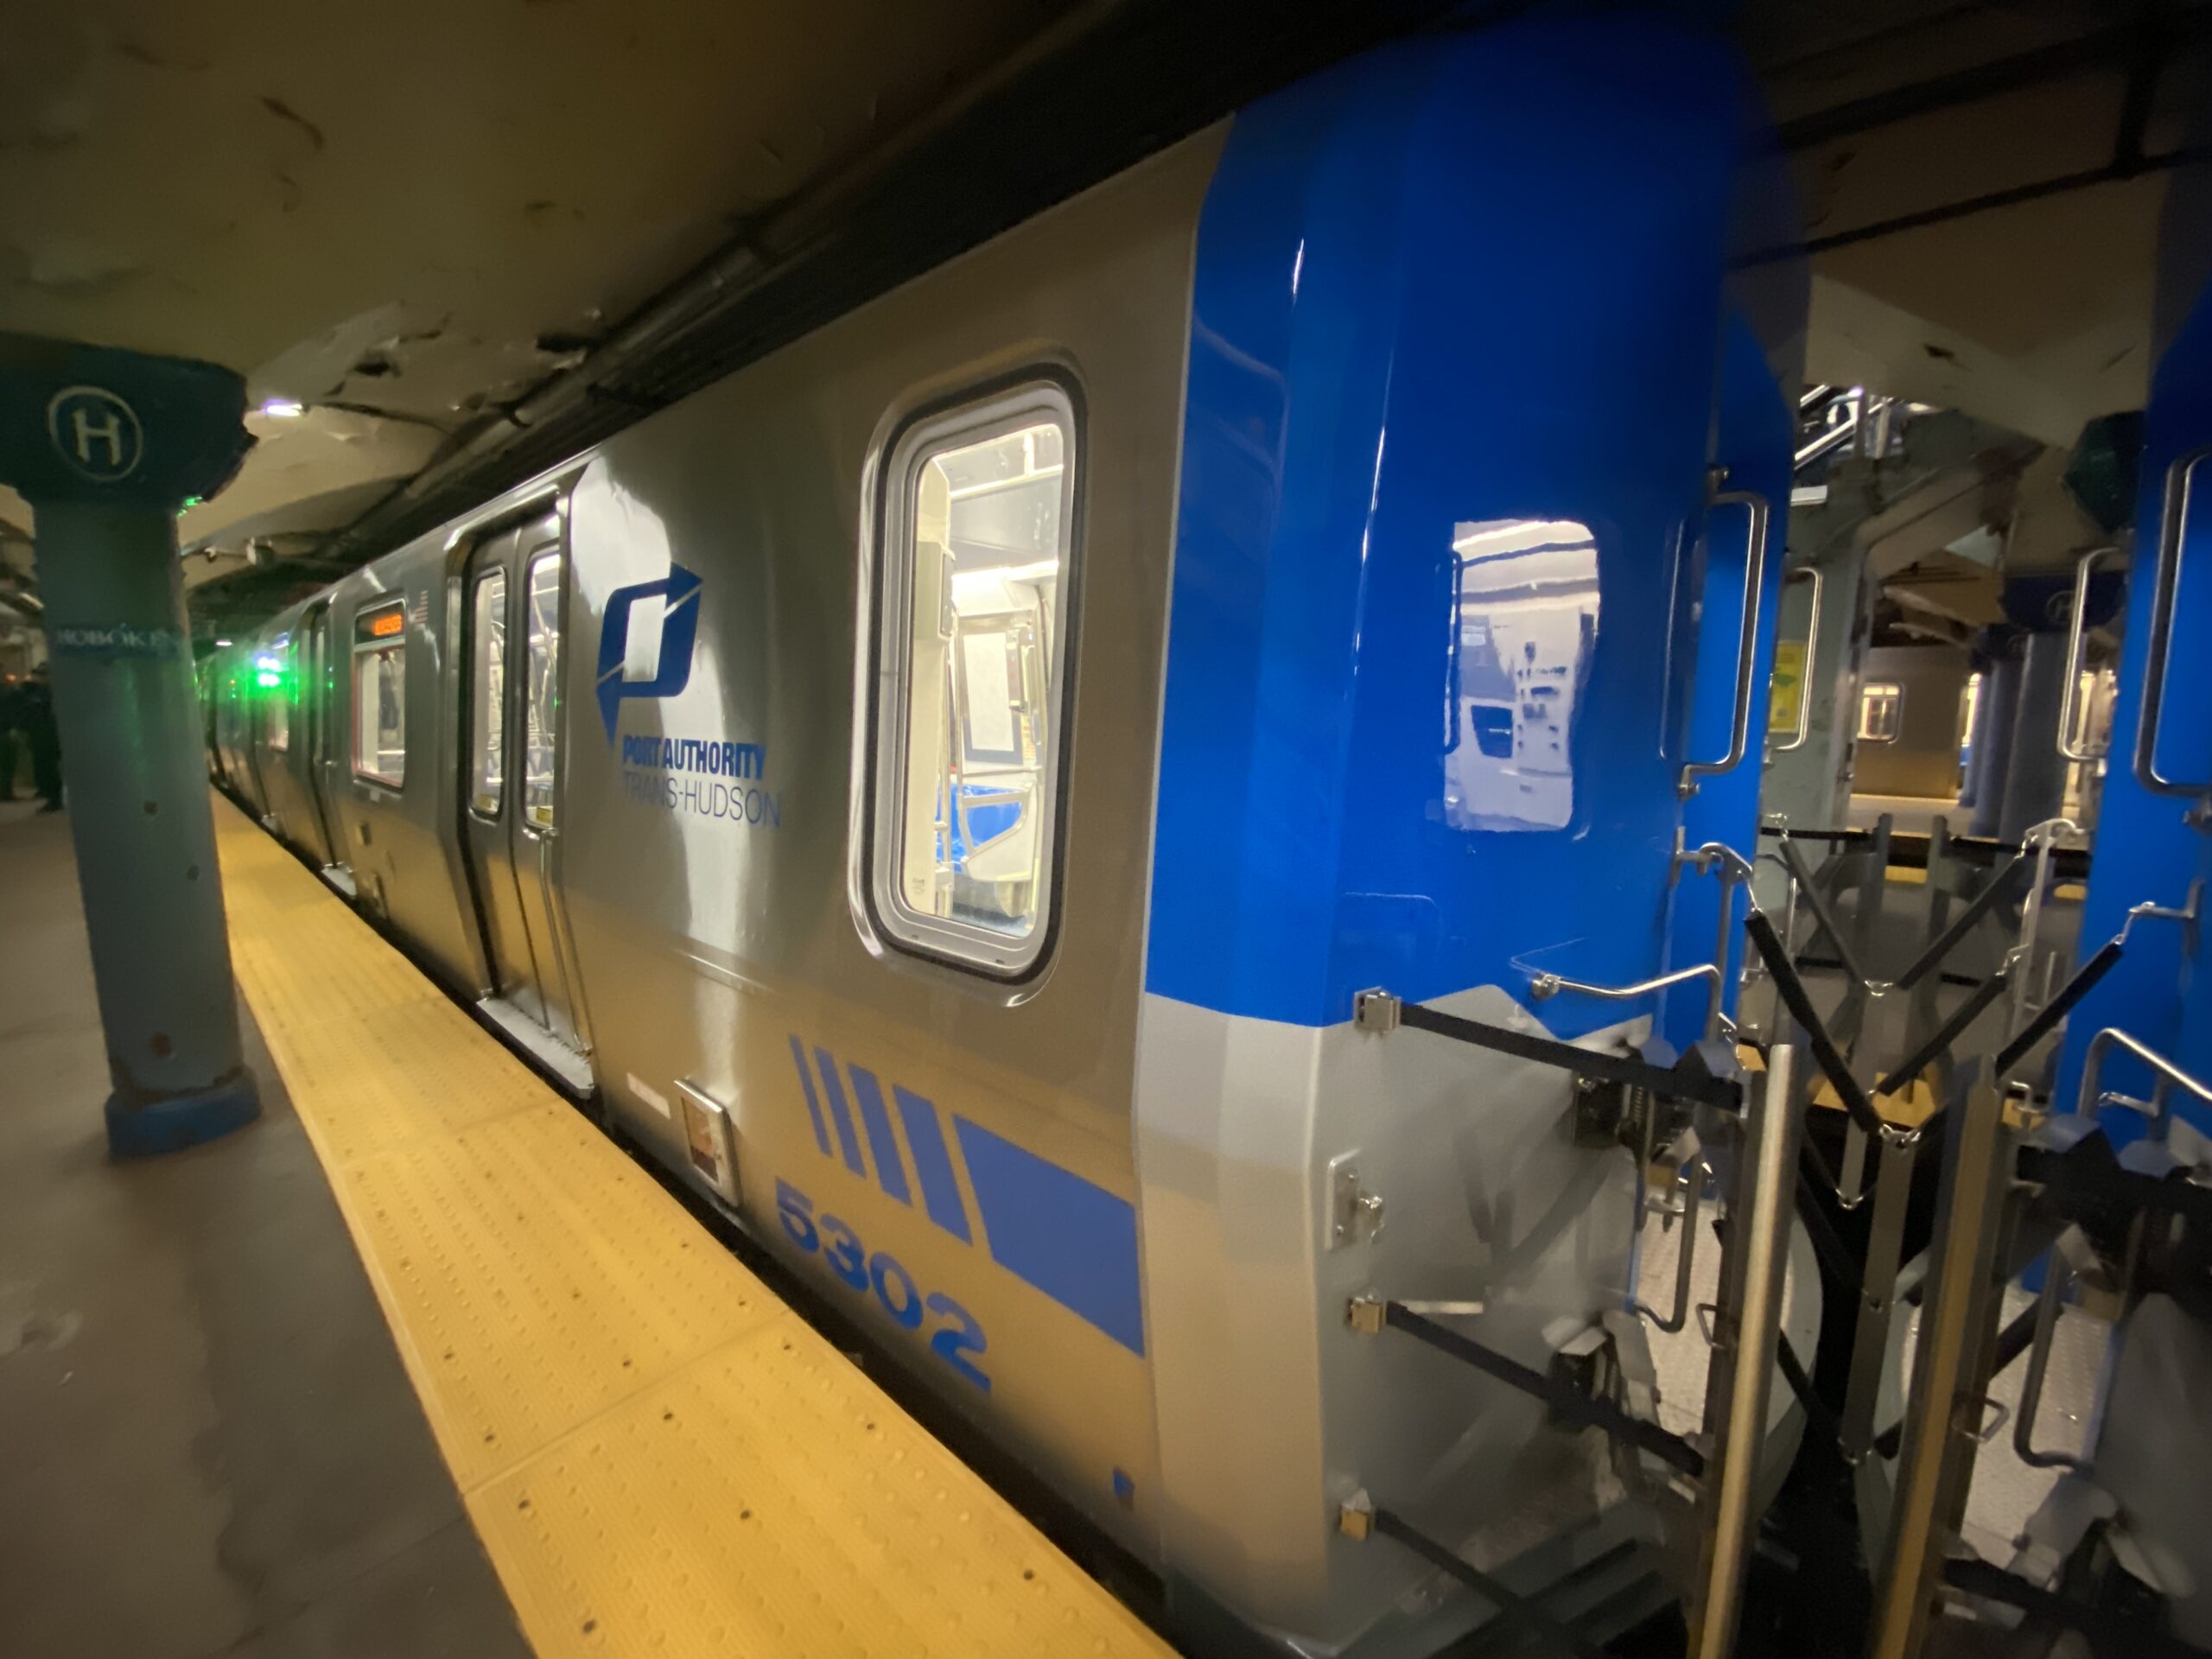 The first of 72 new PATH rail cars